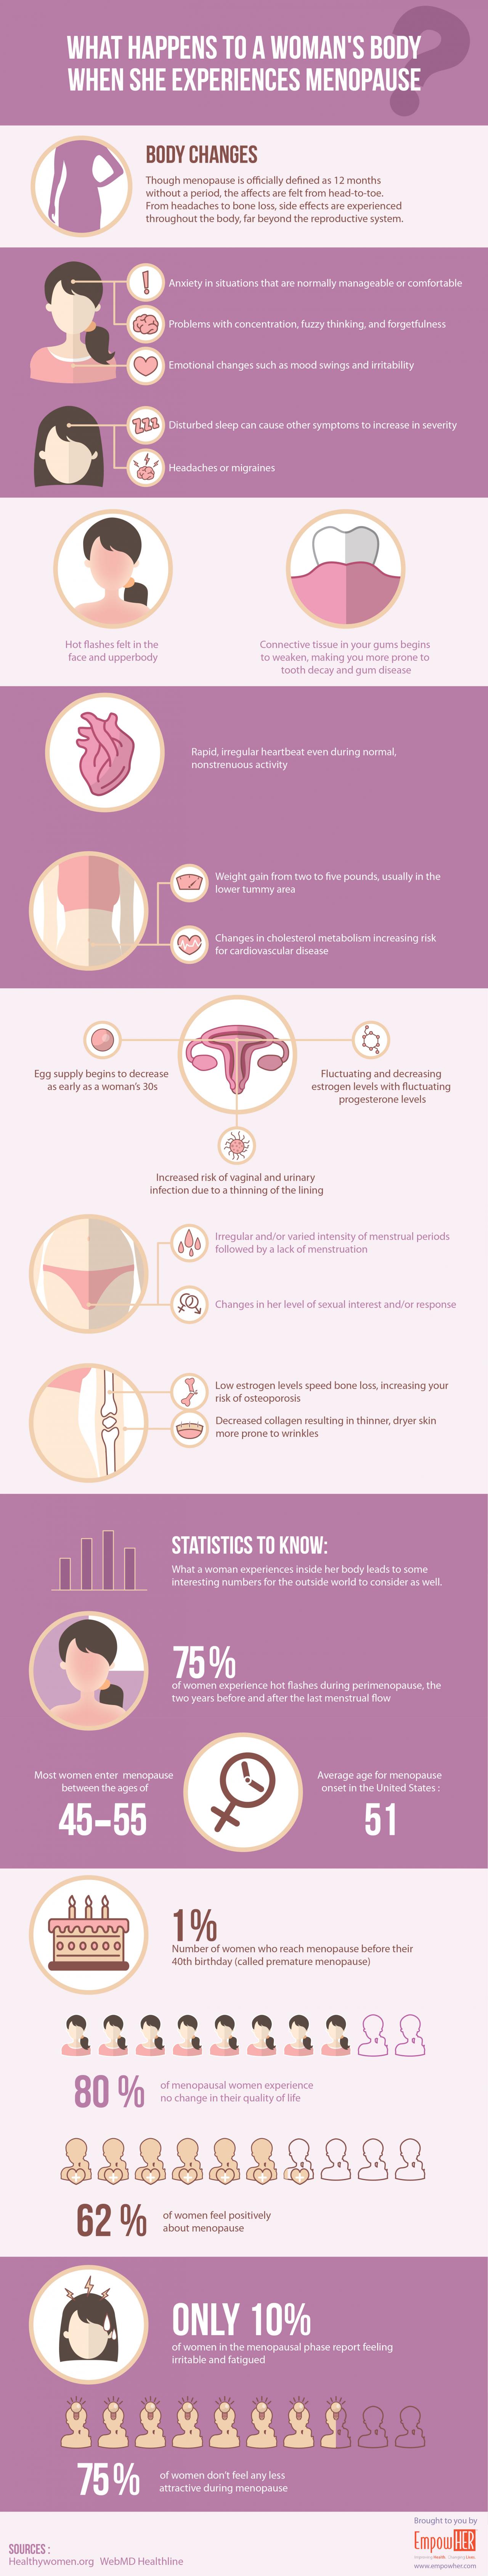 womans-body-experience-during-menopause-2-4-16.jpg